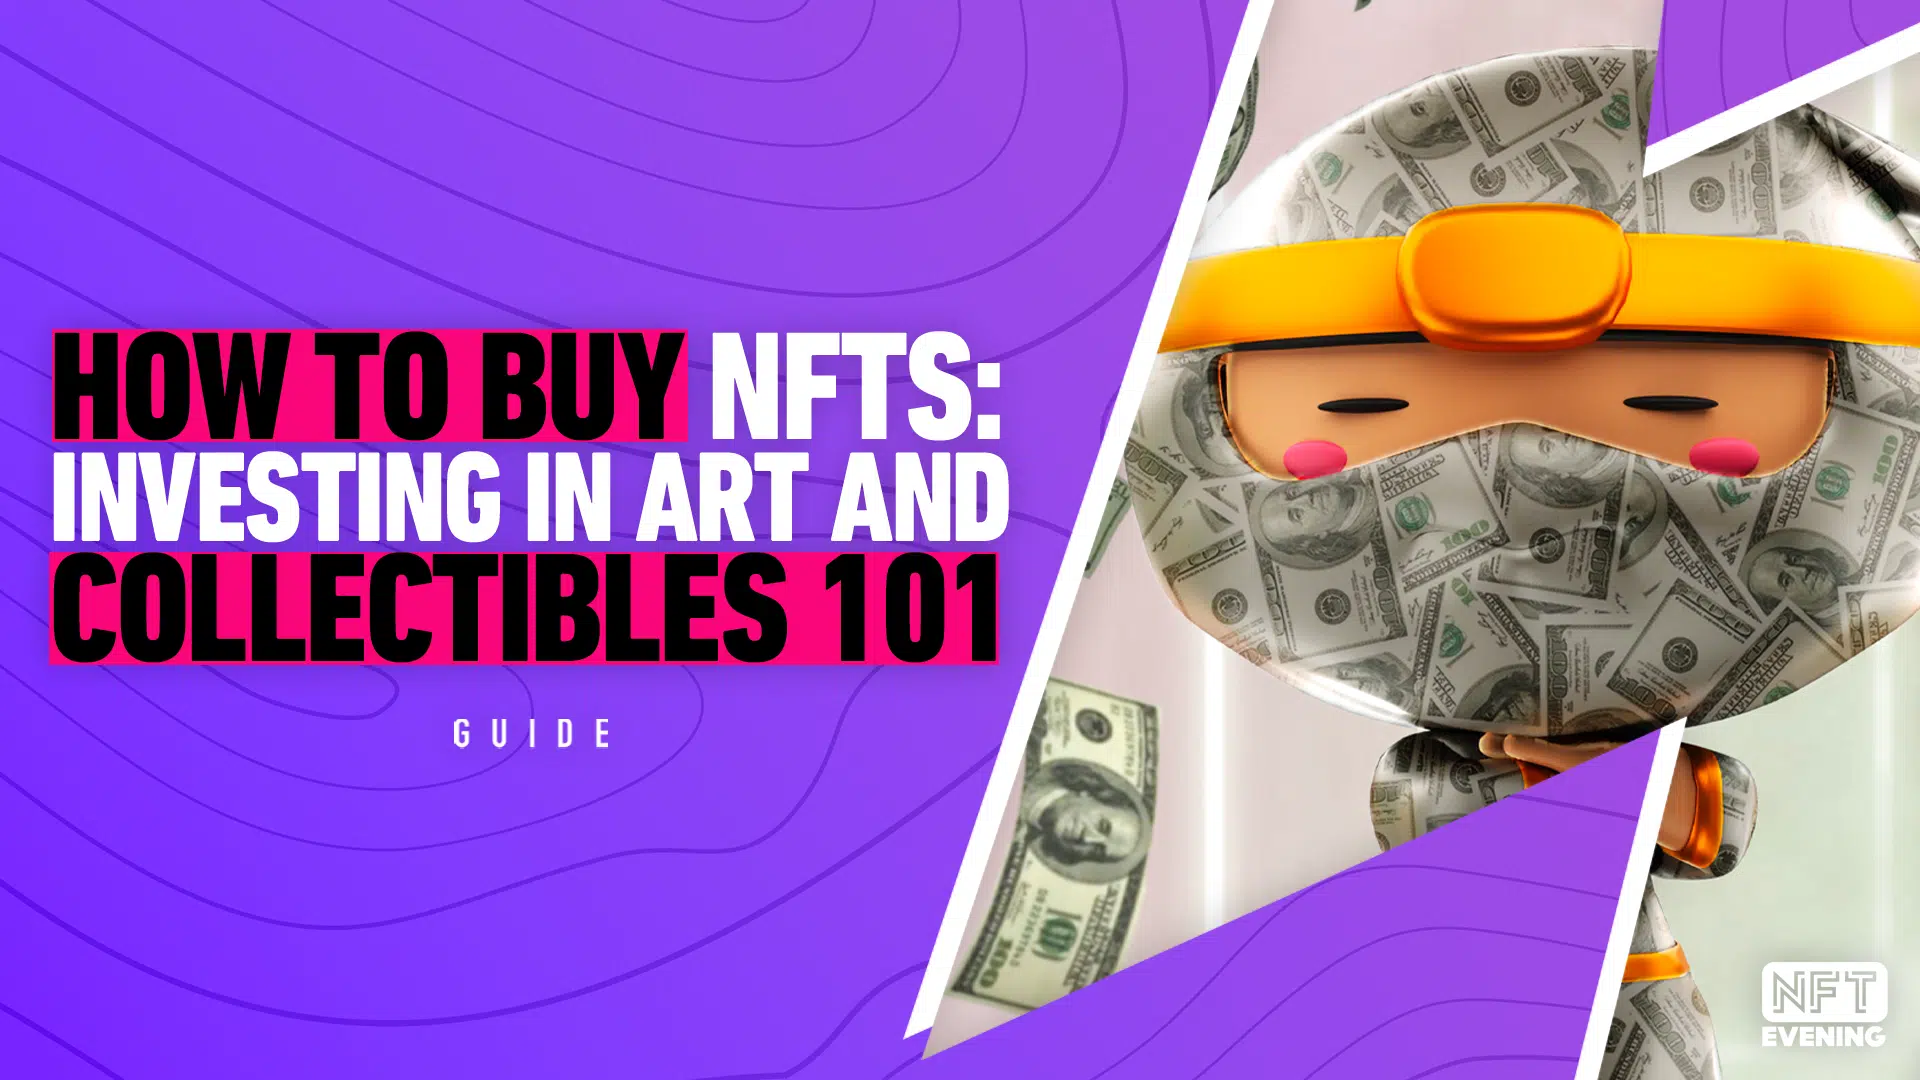 Hicetnunc Launches The Ability To Buy And Sell NFTs On The